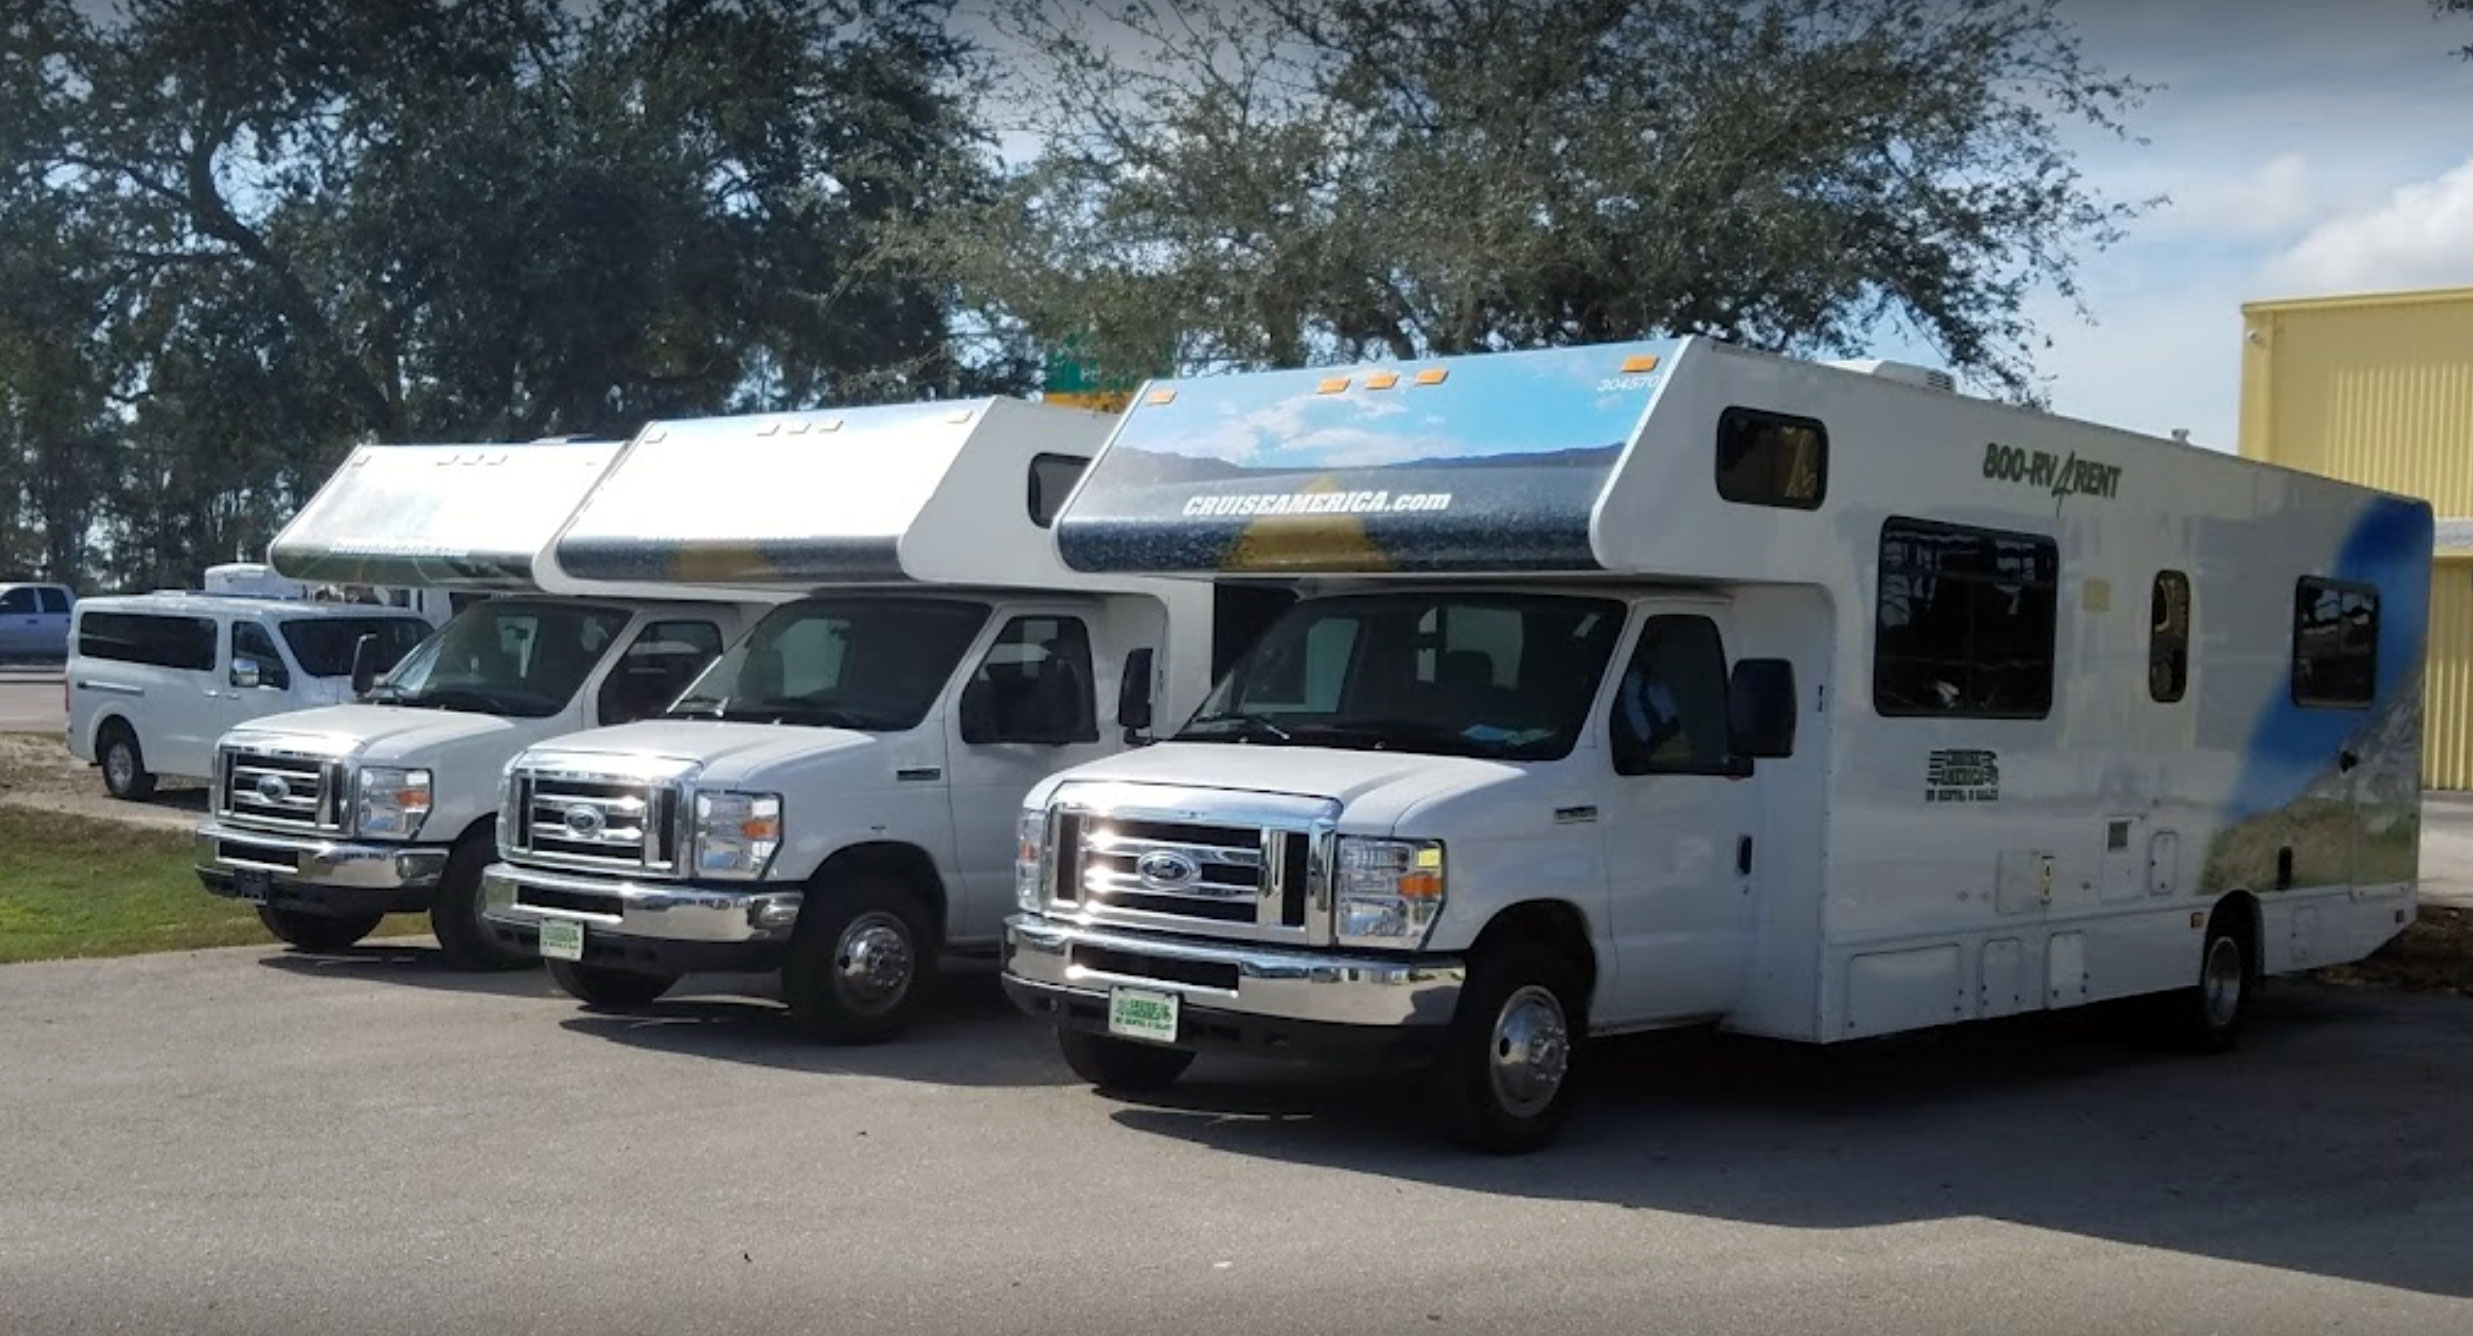 Cruise America Motorhome Rentals at Ro-Lin Rentals of Fort Myers